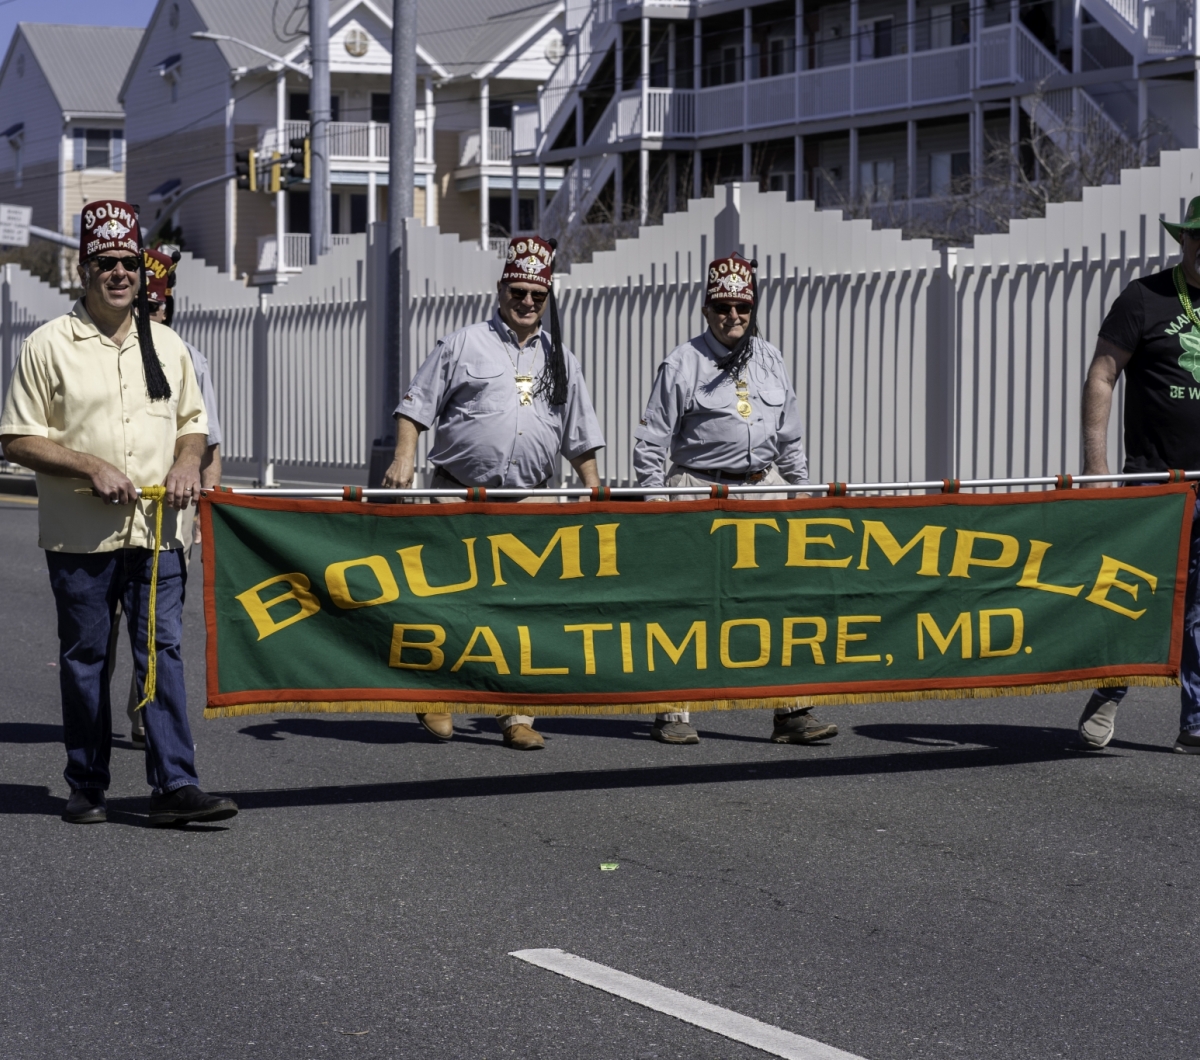 boumi temple baltimore md banner